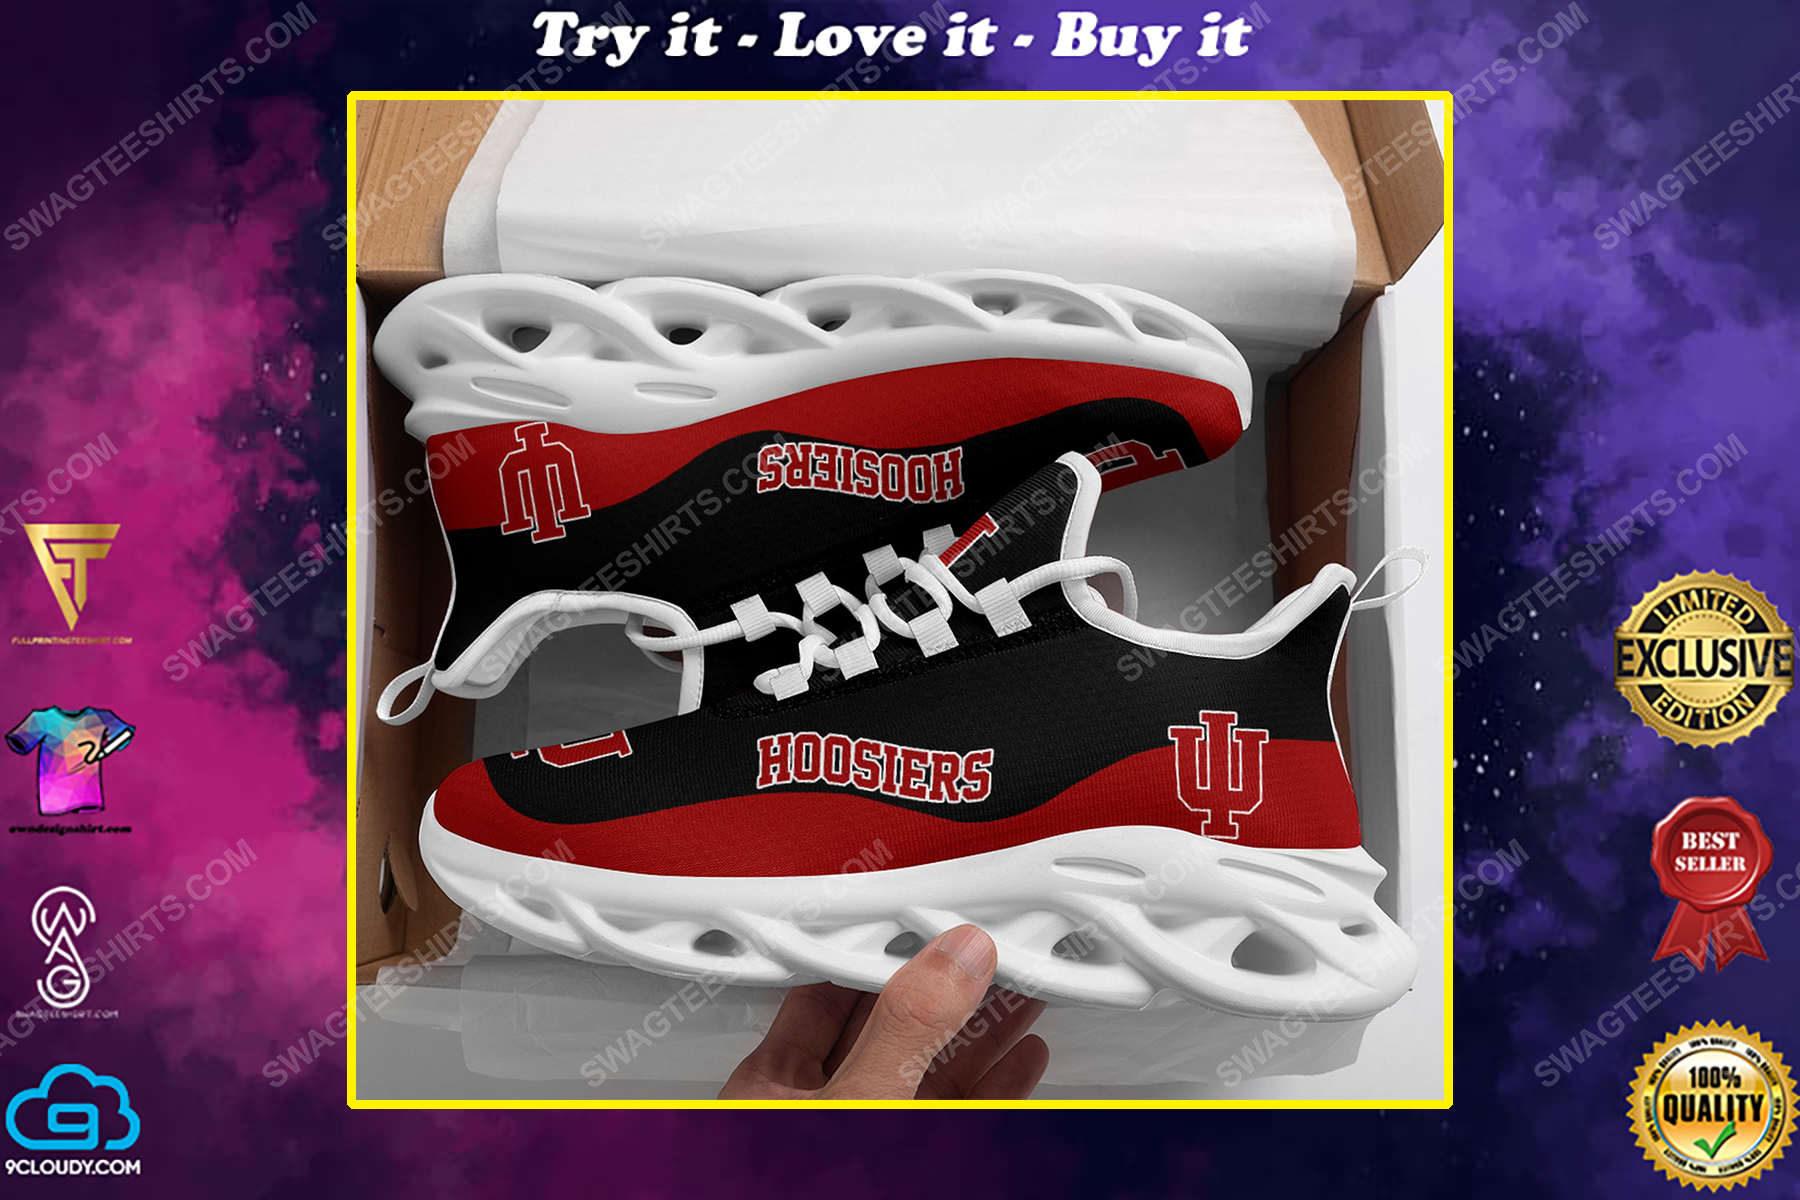 The indiana hoosiers football team max soul shoes